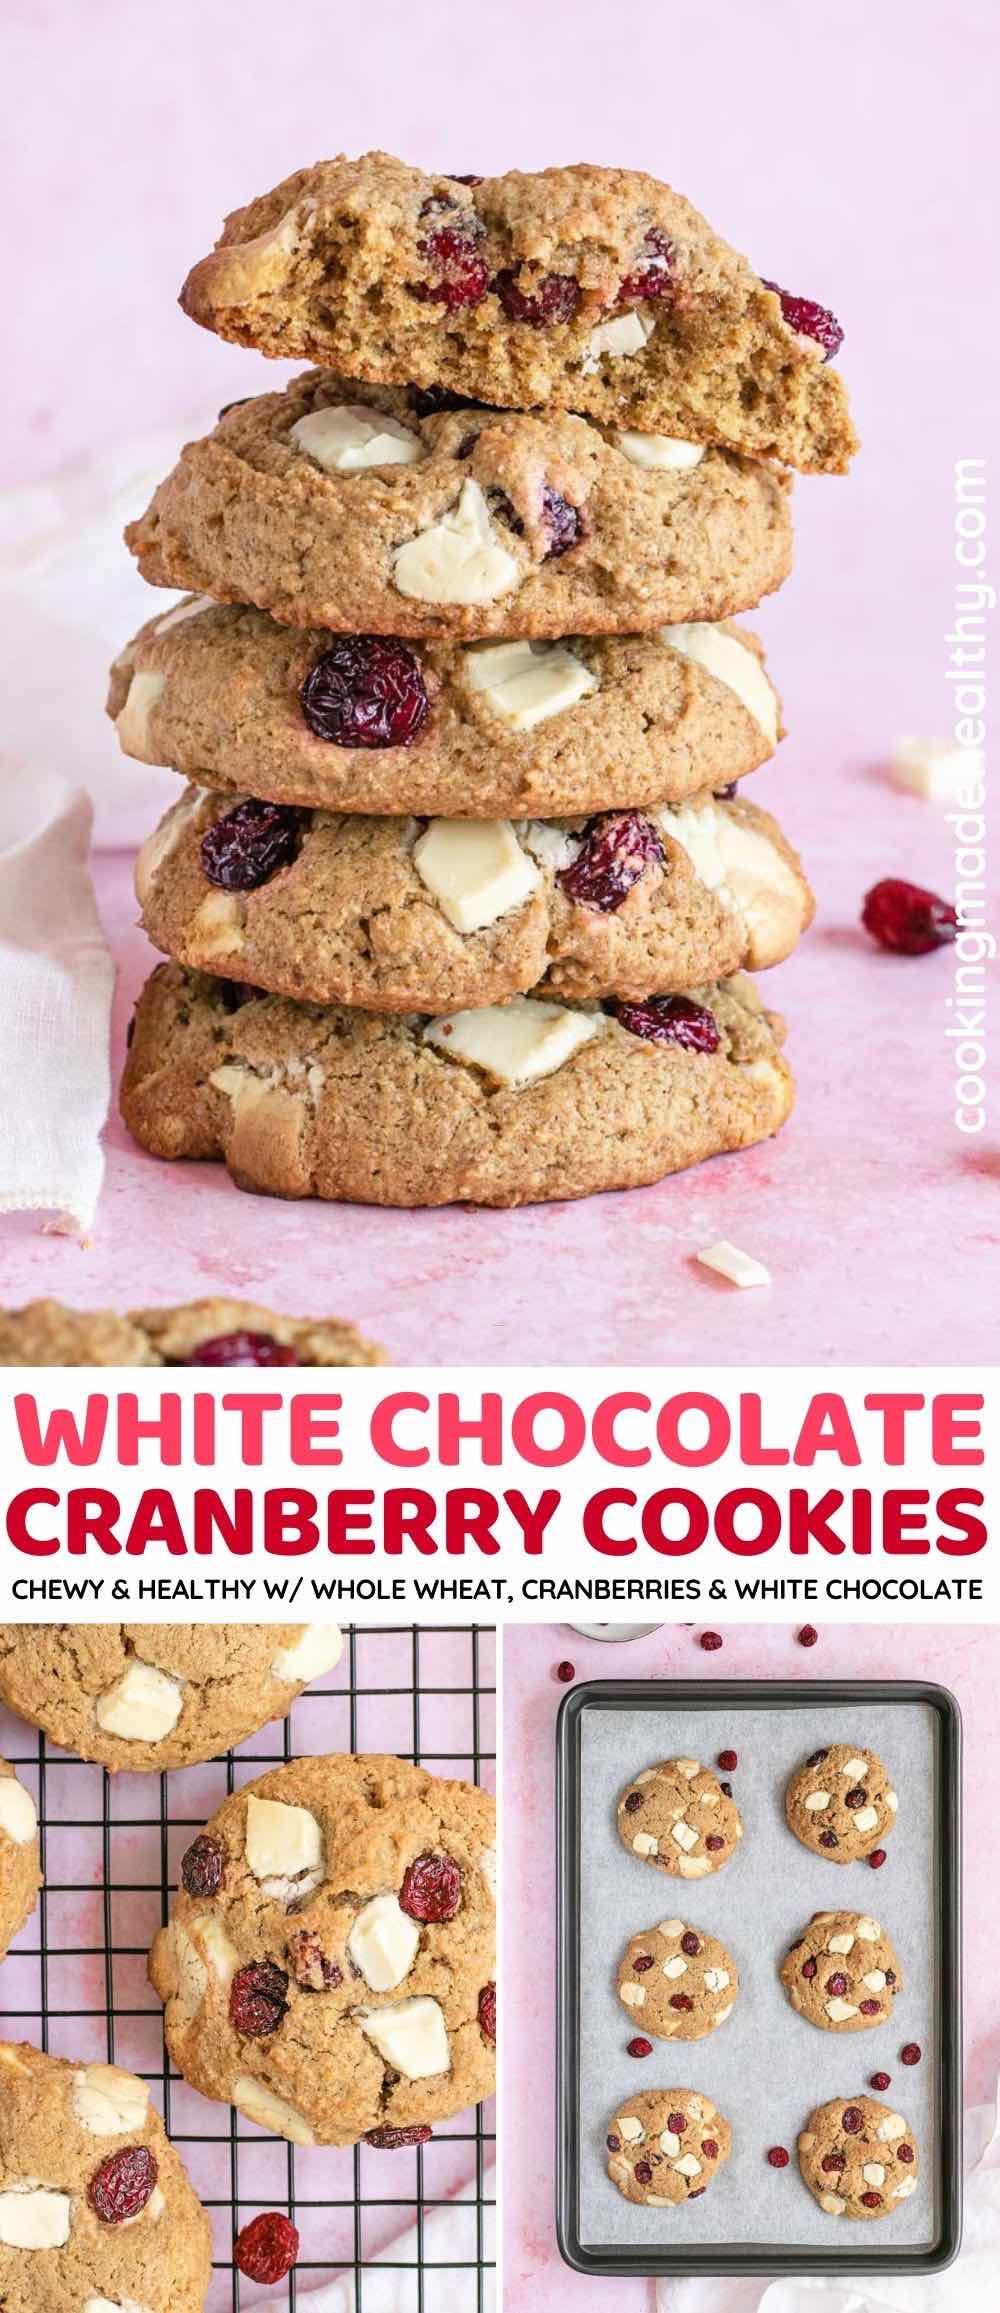 White Chocolate Cranberry Cookies collage